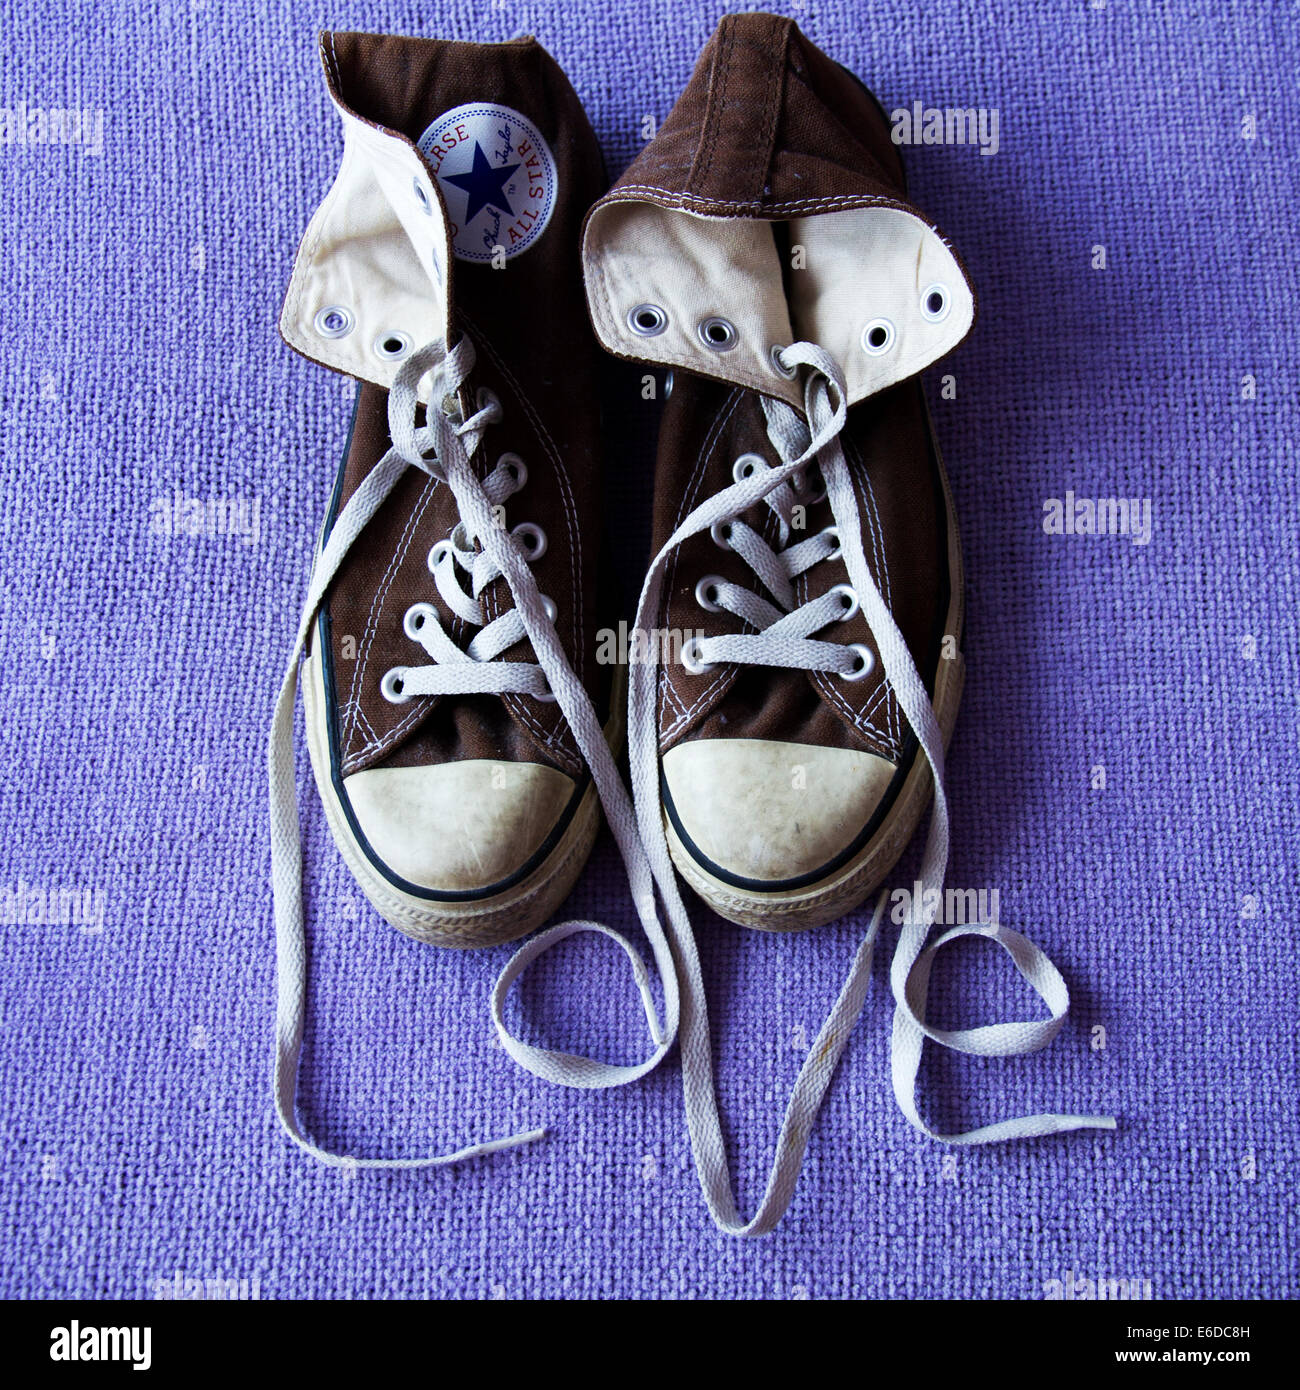 Brown converse all-star boots on lilac background with laces spelling 'love'. Stock Photo